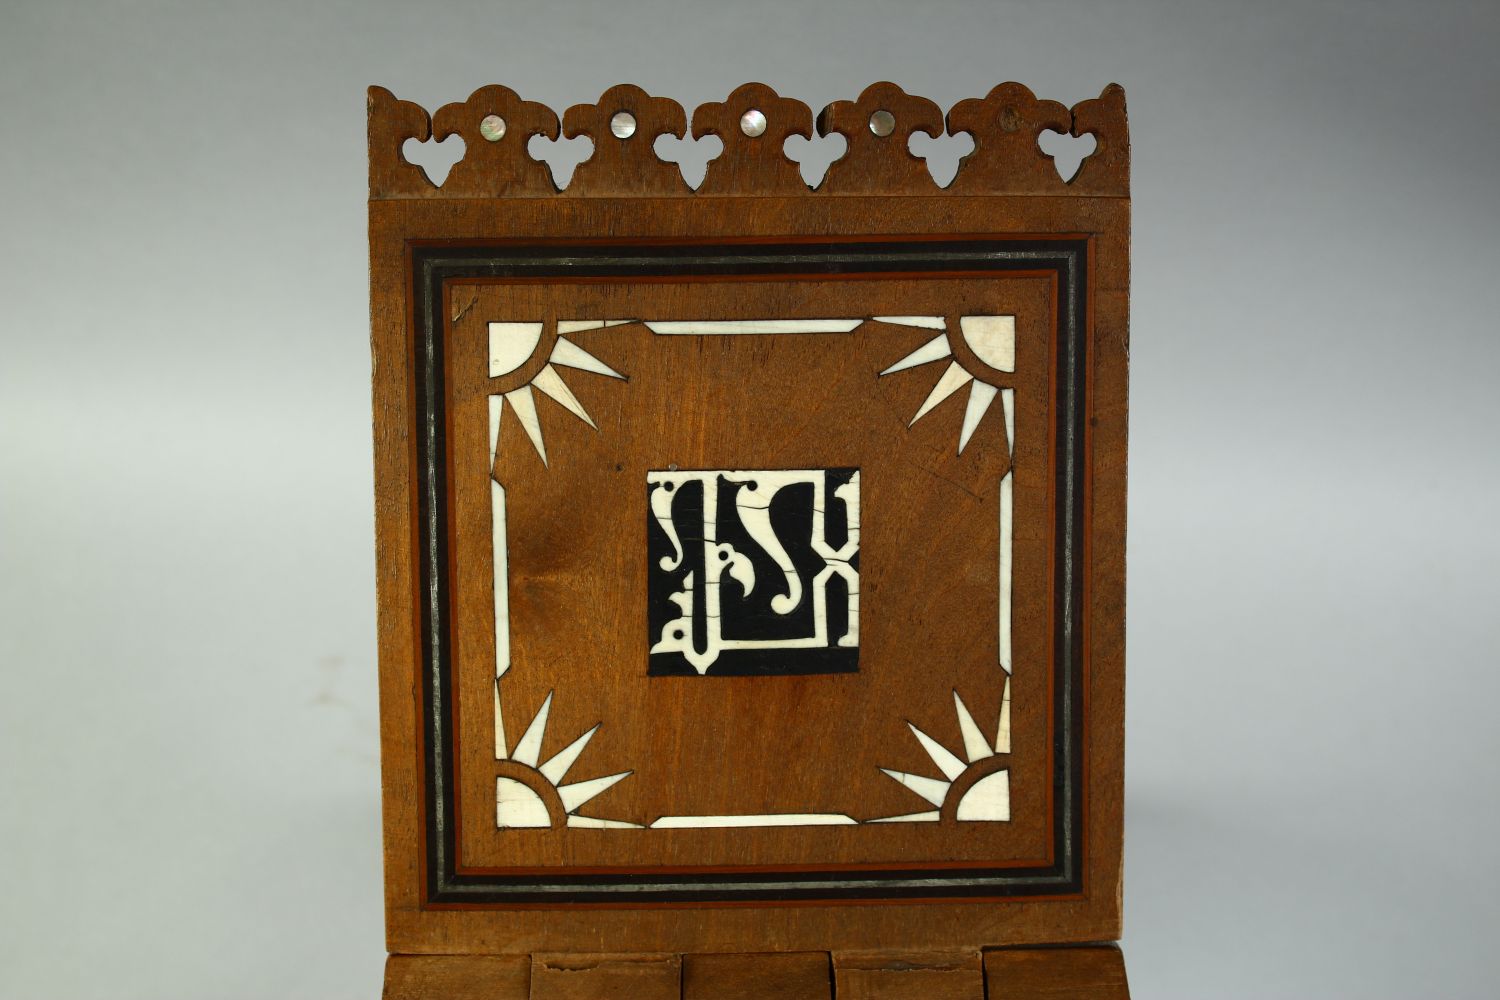 A FINE 19TH CENTURY ISLAMIC OTTOMAN BONE AND MOTHER OF PEARL INLAID QURAN BOOK STAND, carved with - Image 4 of 7